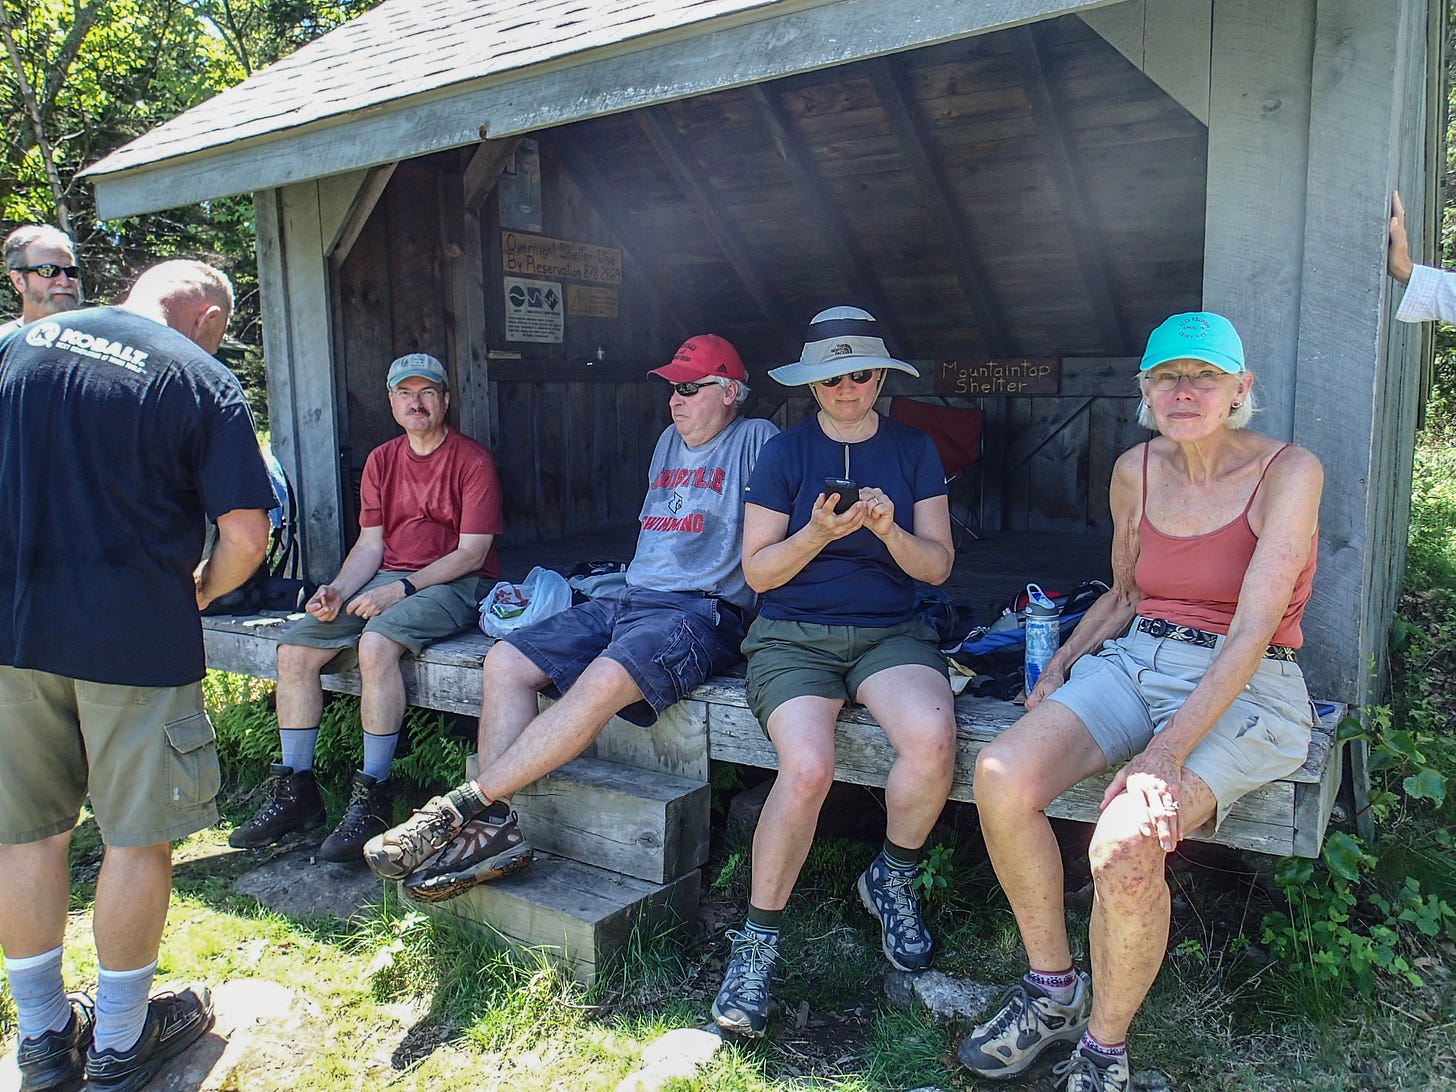 Hikers taking a lunch break at a shelter